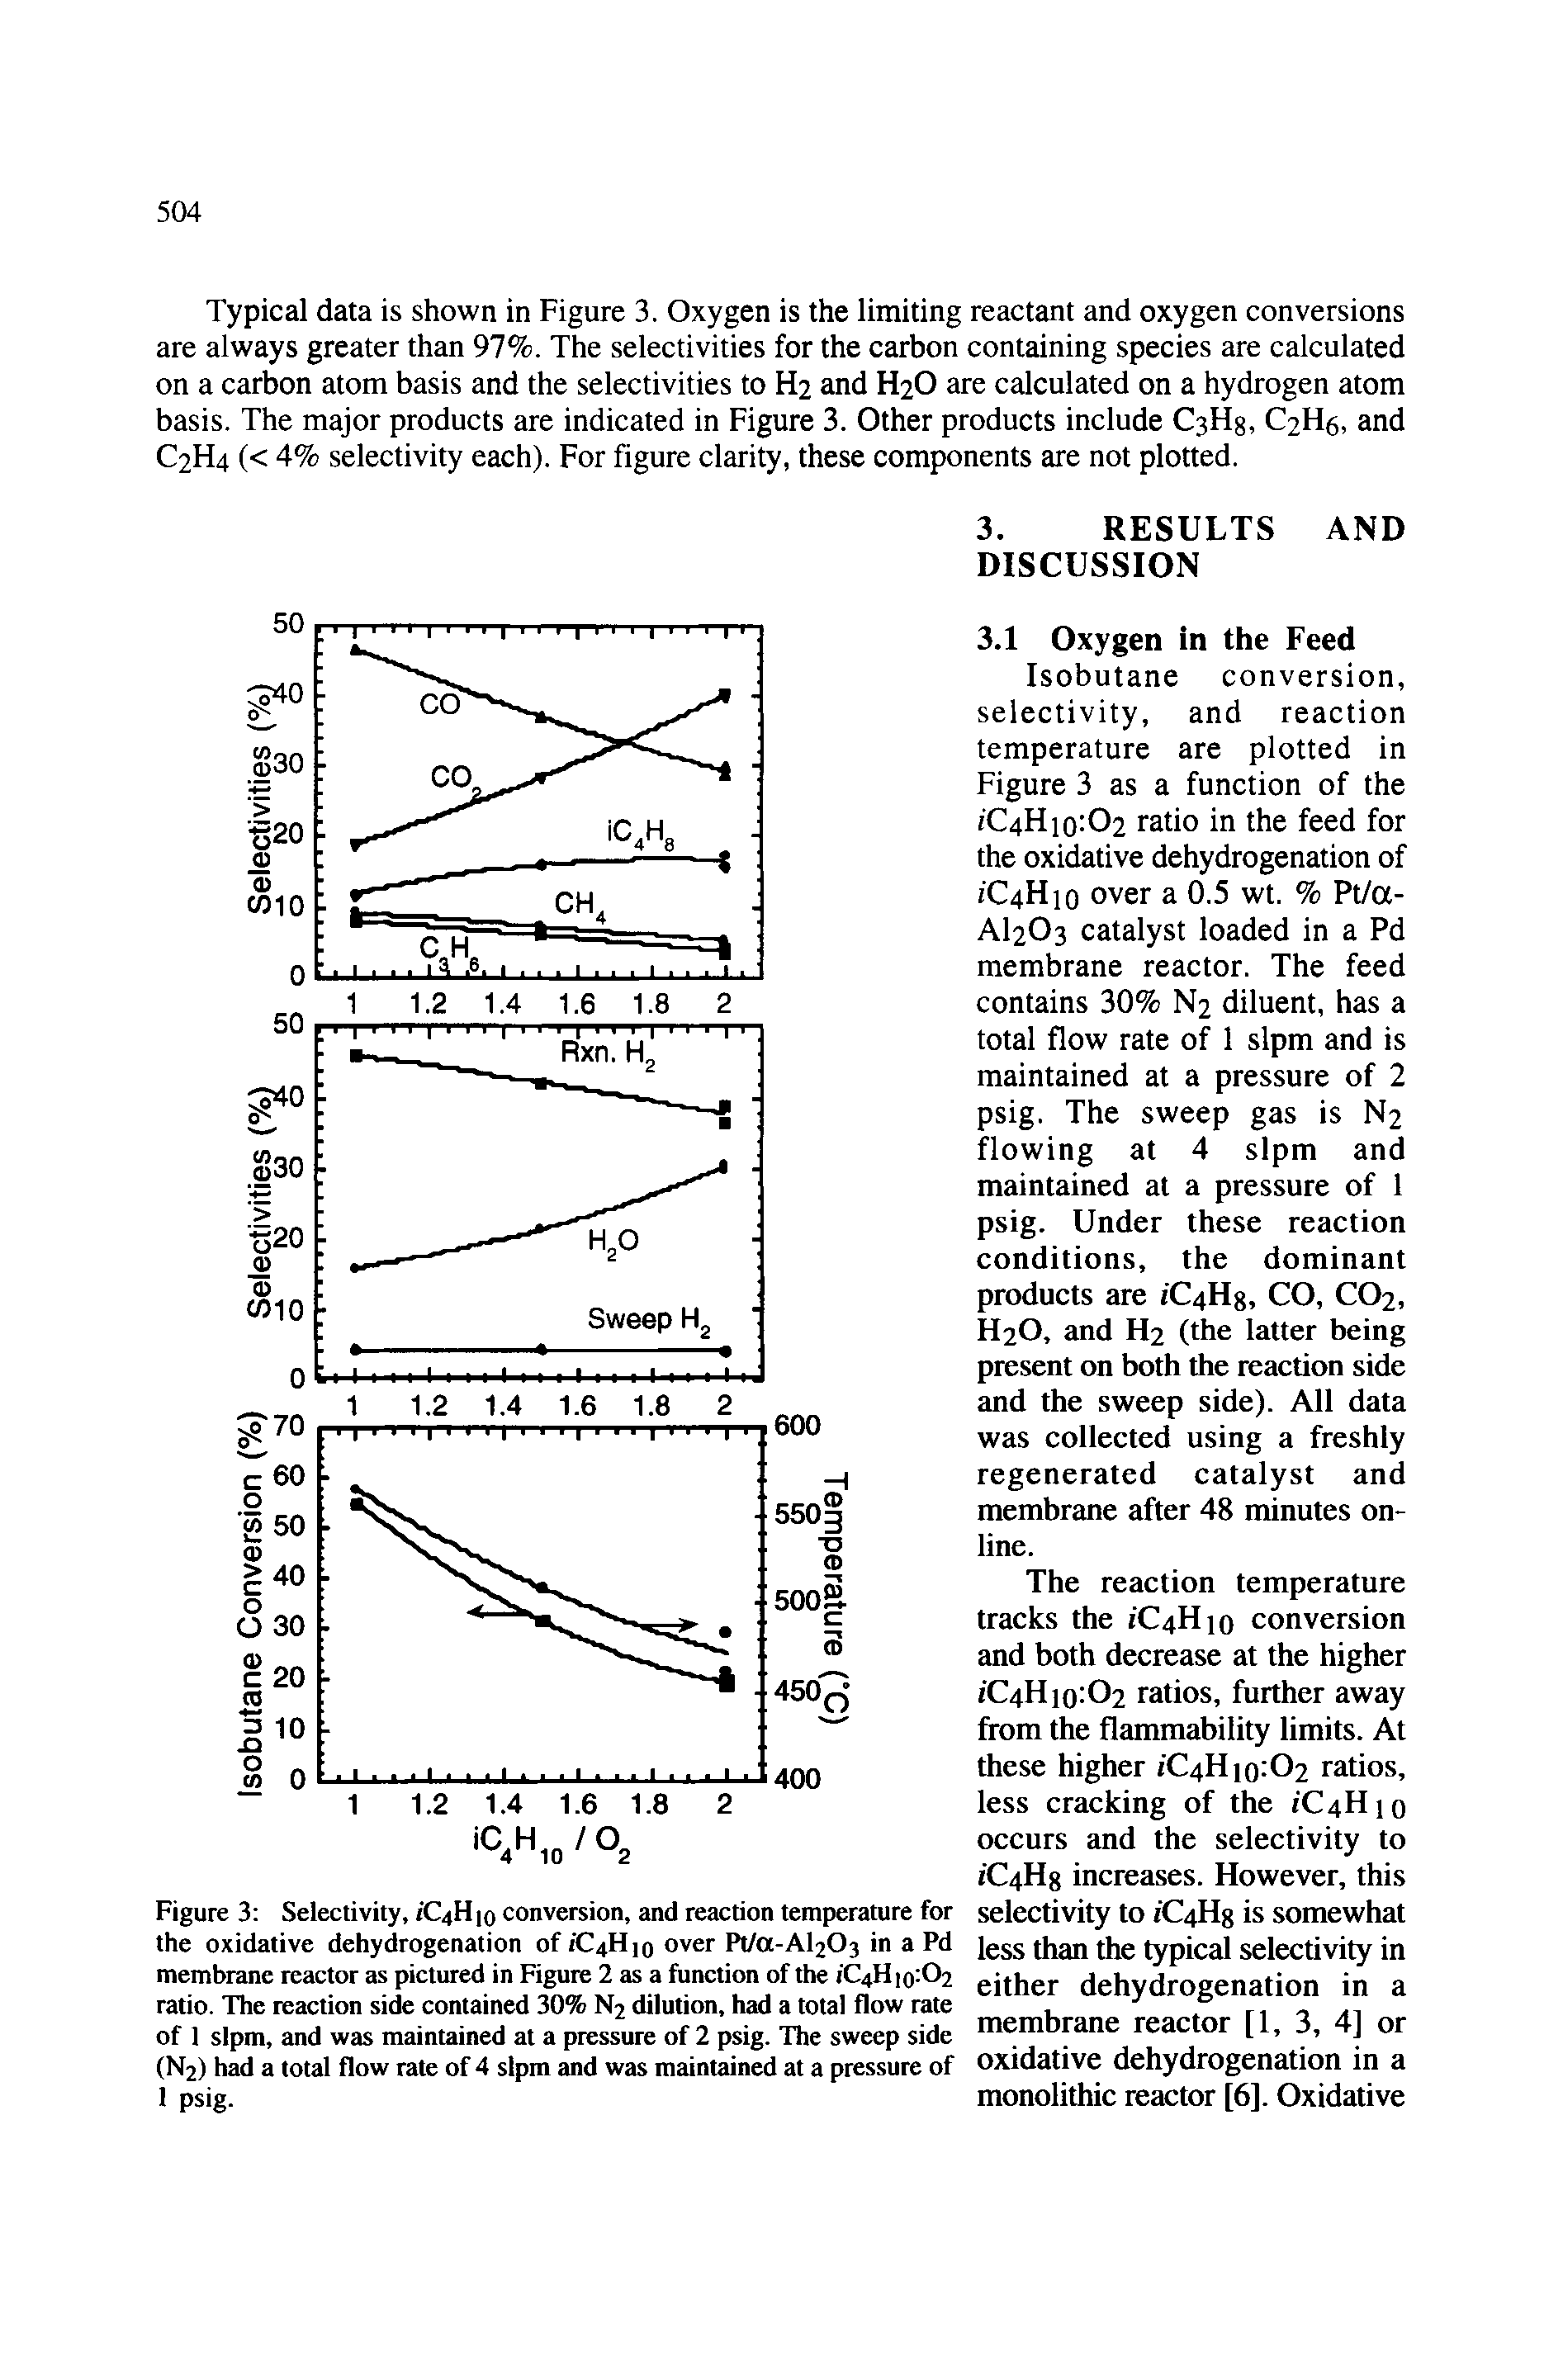 Figure 3 Selectivity, iC4H o conversion, and reaction temperature for the oxidative dehydrogenation of 1C4H10 over Pt/o-Al203 in a Pd membrane reactor as pictured in Figure 2 as a function of the iC4H o 02 ratio. The reaction side contained 30% N2 dilution, had a total flow rate of 1 sipm, and was maintained at a pressure of 2 psig. The sweep side (N2) had a total flow rate of 4 slpm and was maintained at a pressure of 1 psig.